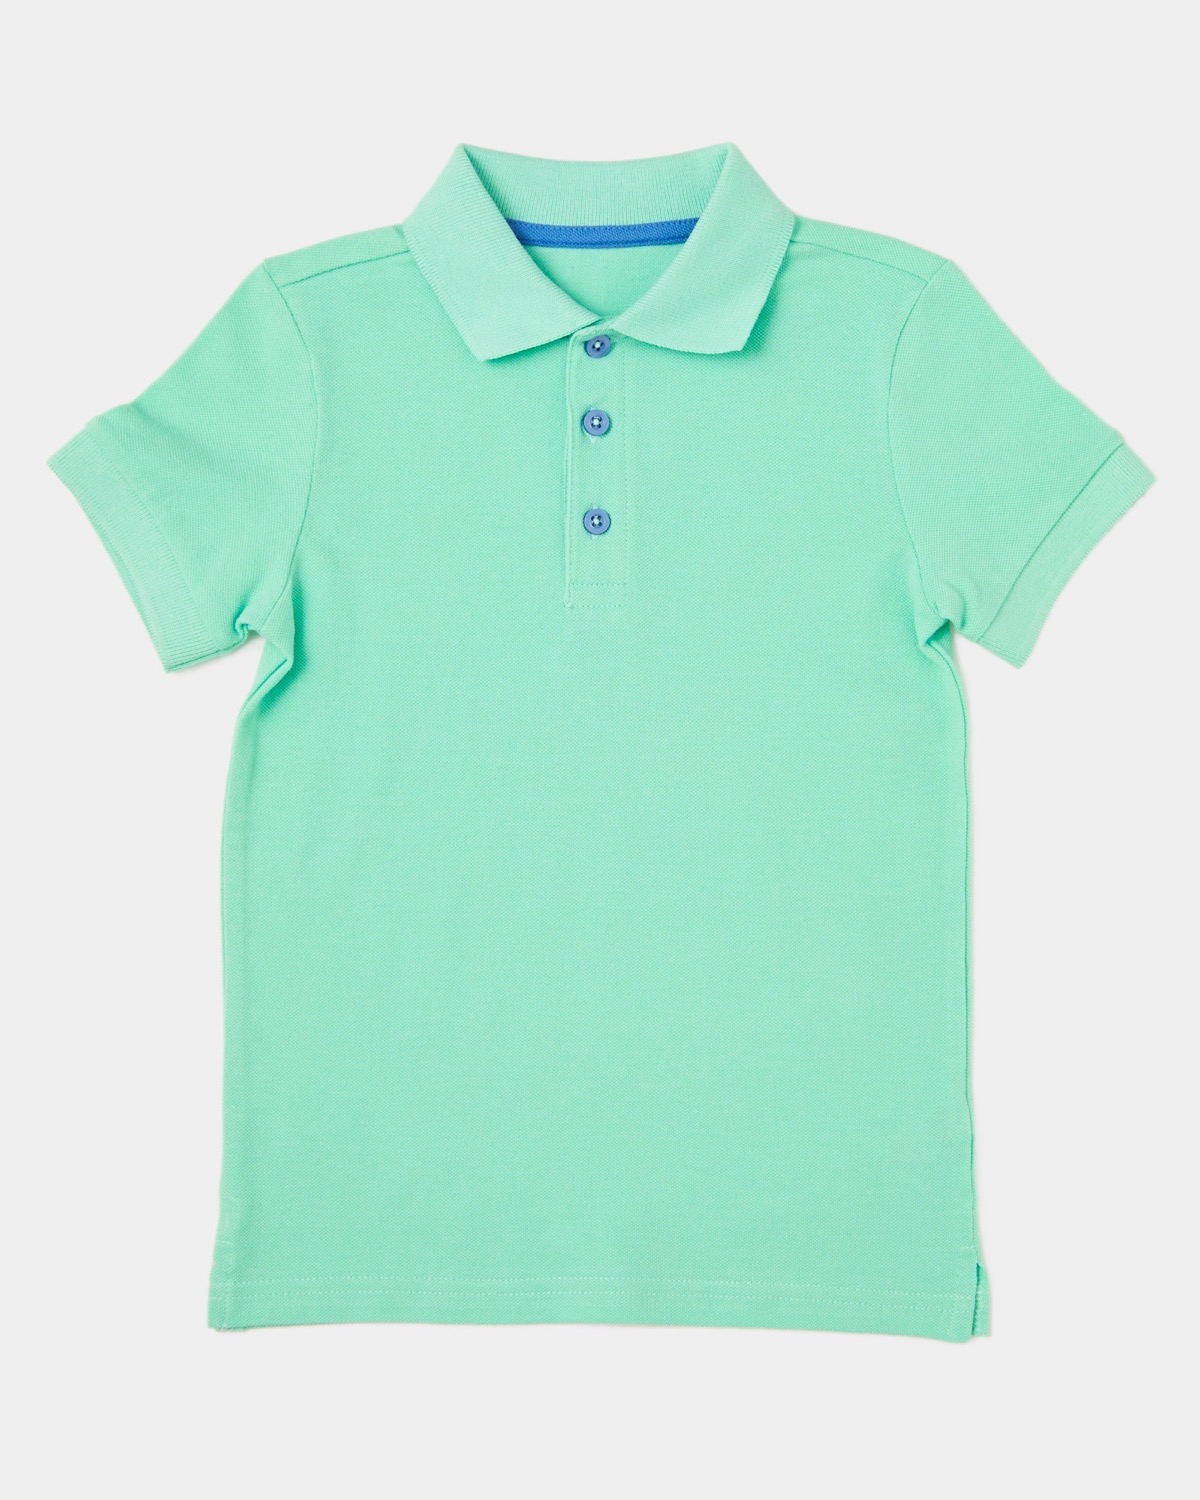 Dunnes Stores | Mint Boys Plain Pique Polo (3-14 years)